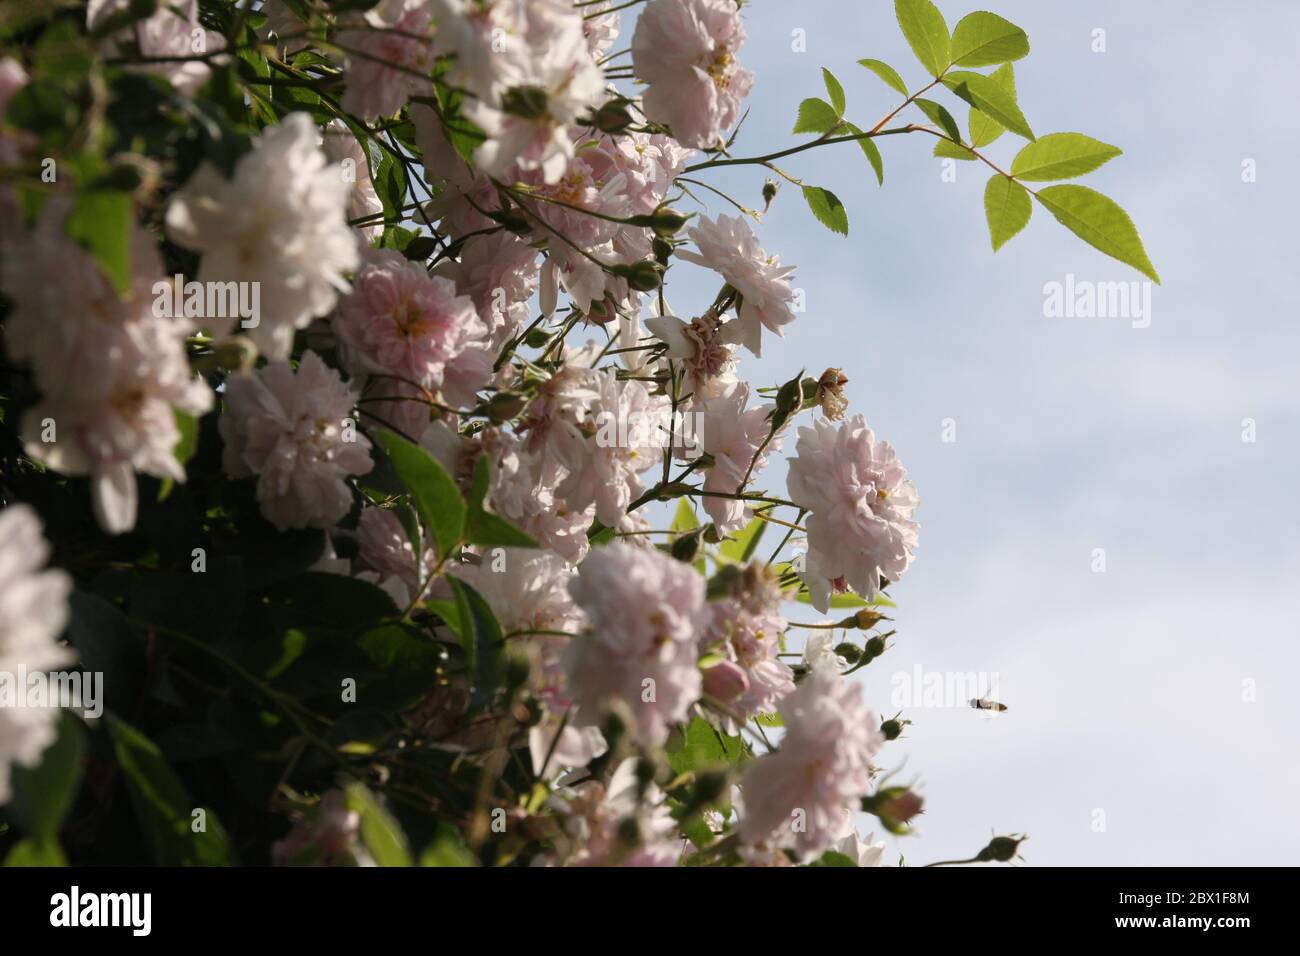 Close up of pale pink blossoms of rambler or climbing roses against pale blue sky on blurred background Stock Photo